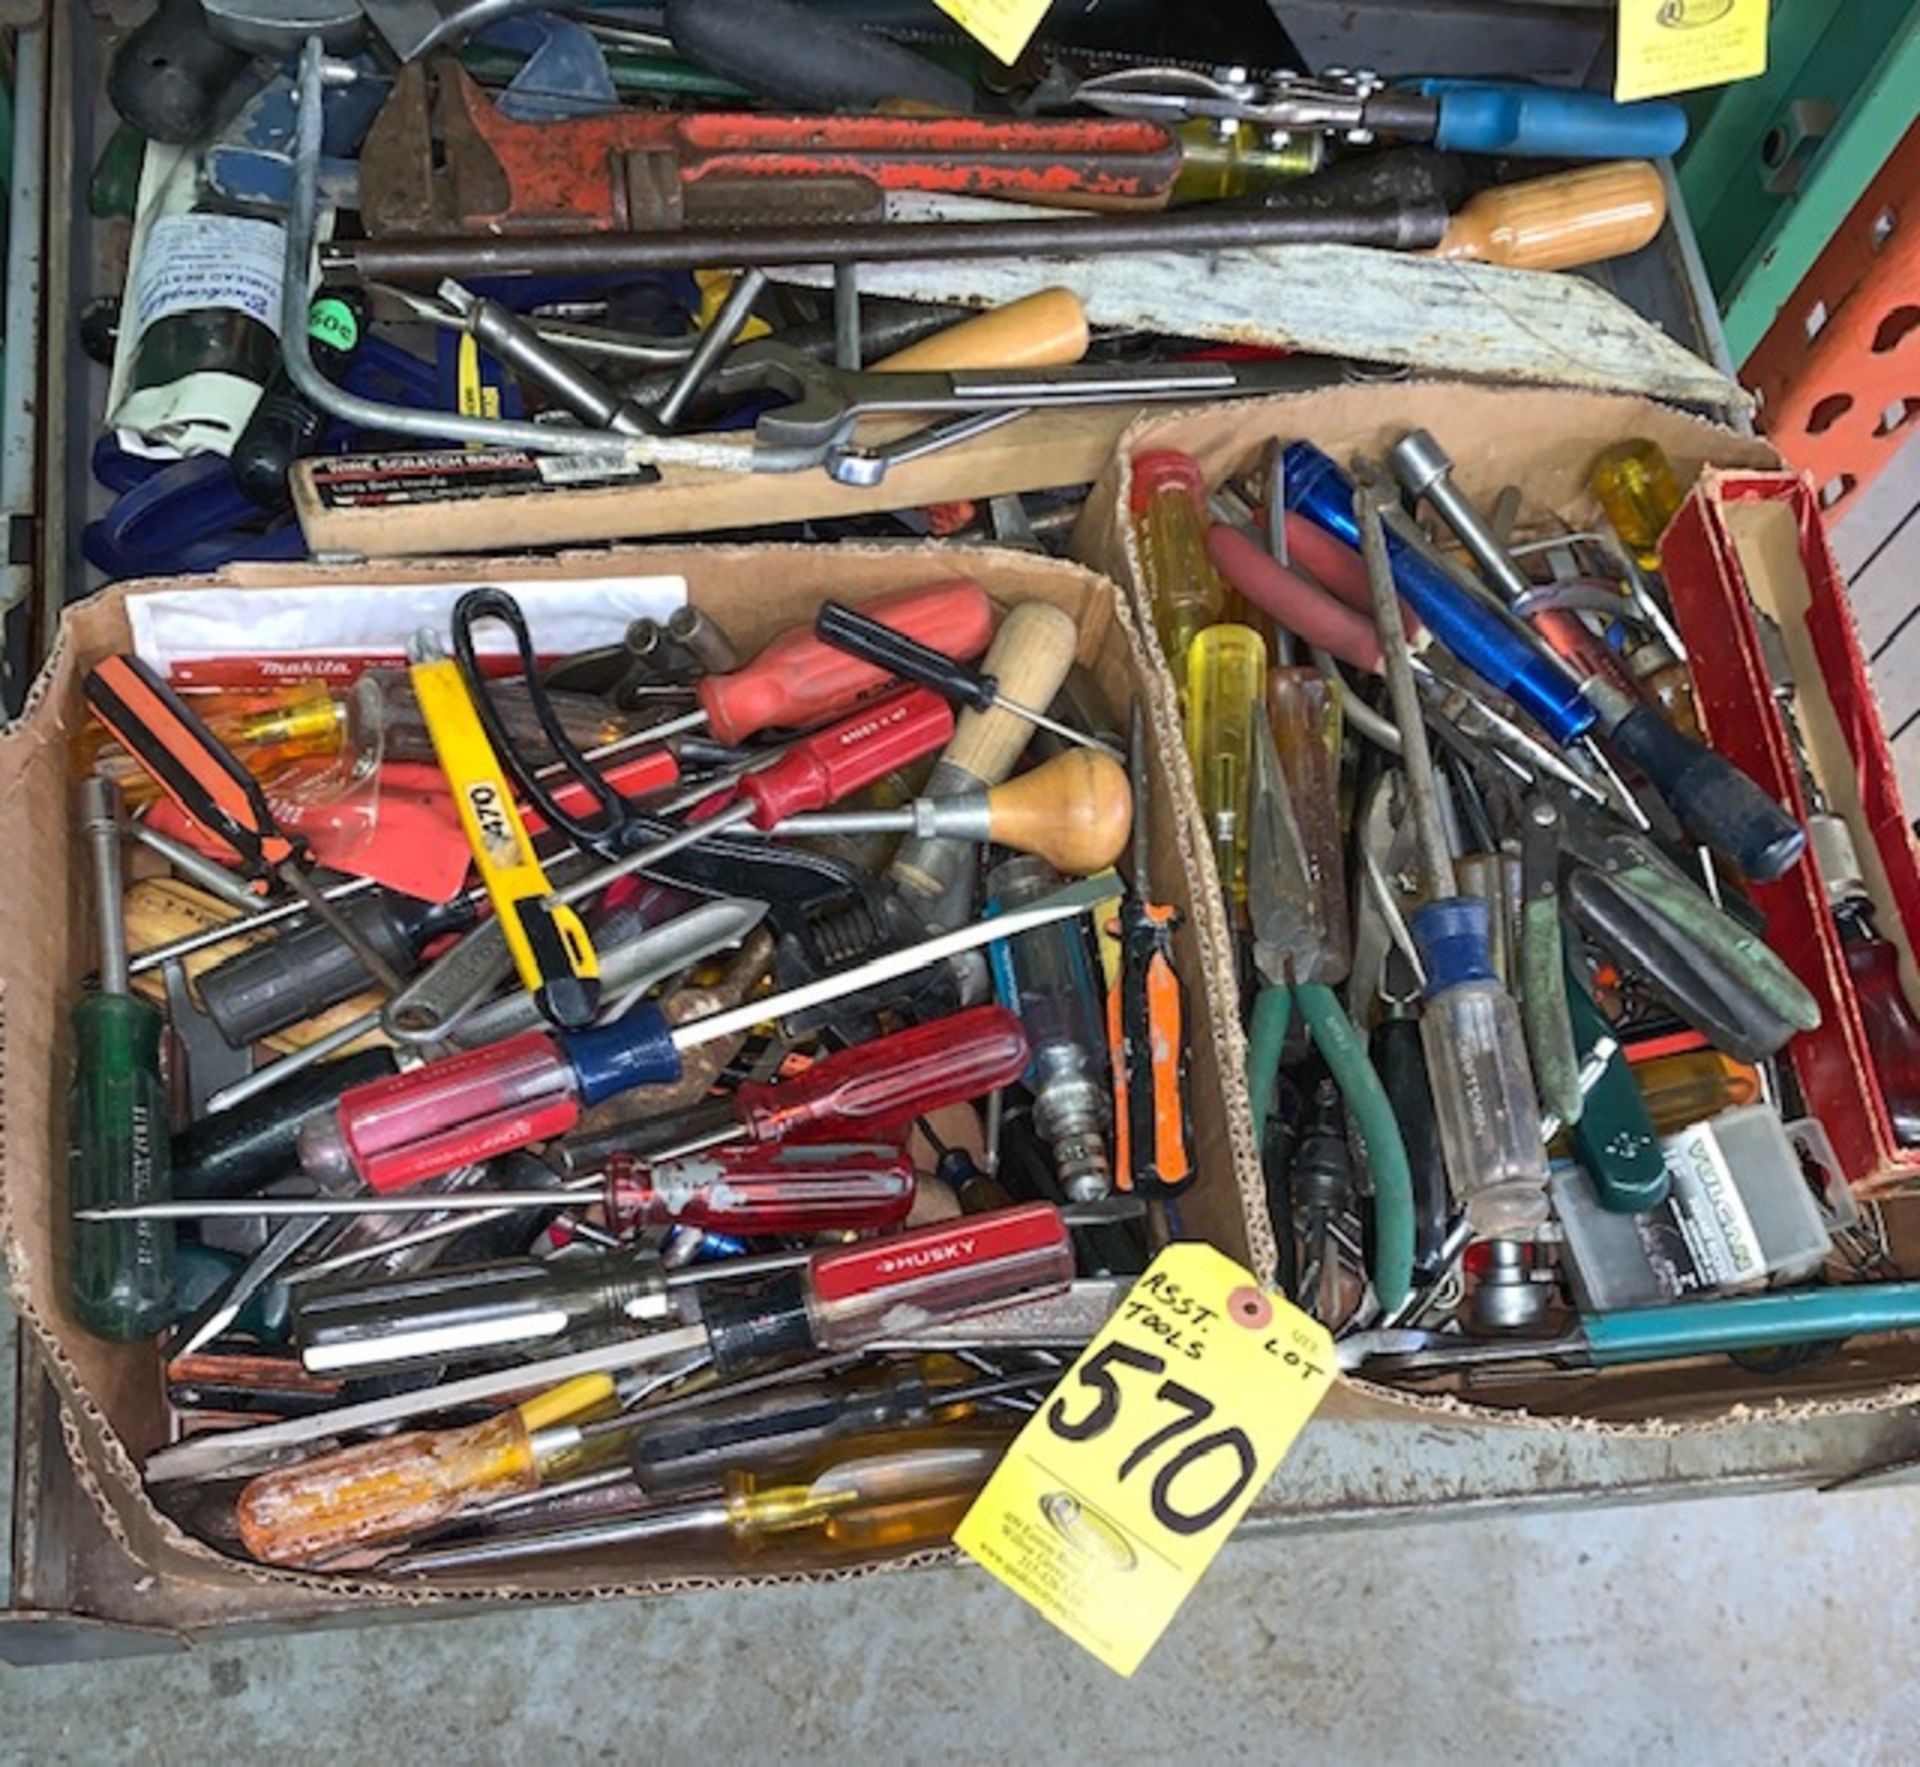 ENTIRE DRAWER OF TOOLS (2ND SHELF OF LOT 554 - RIGHT SIDE)